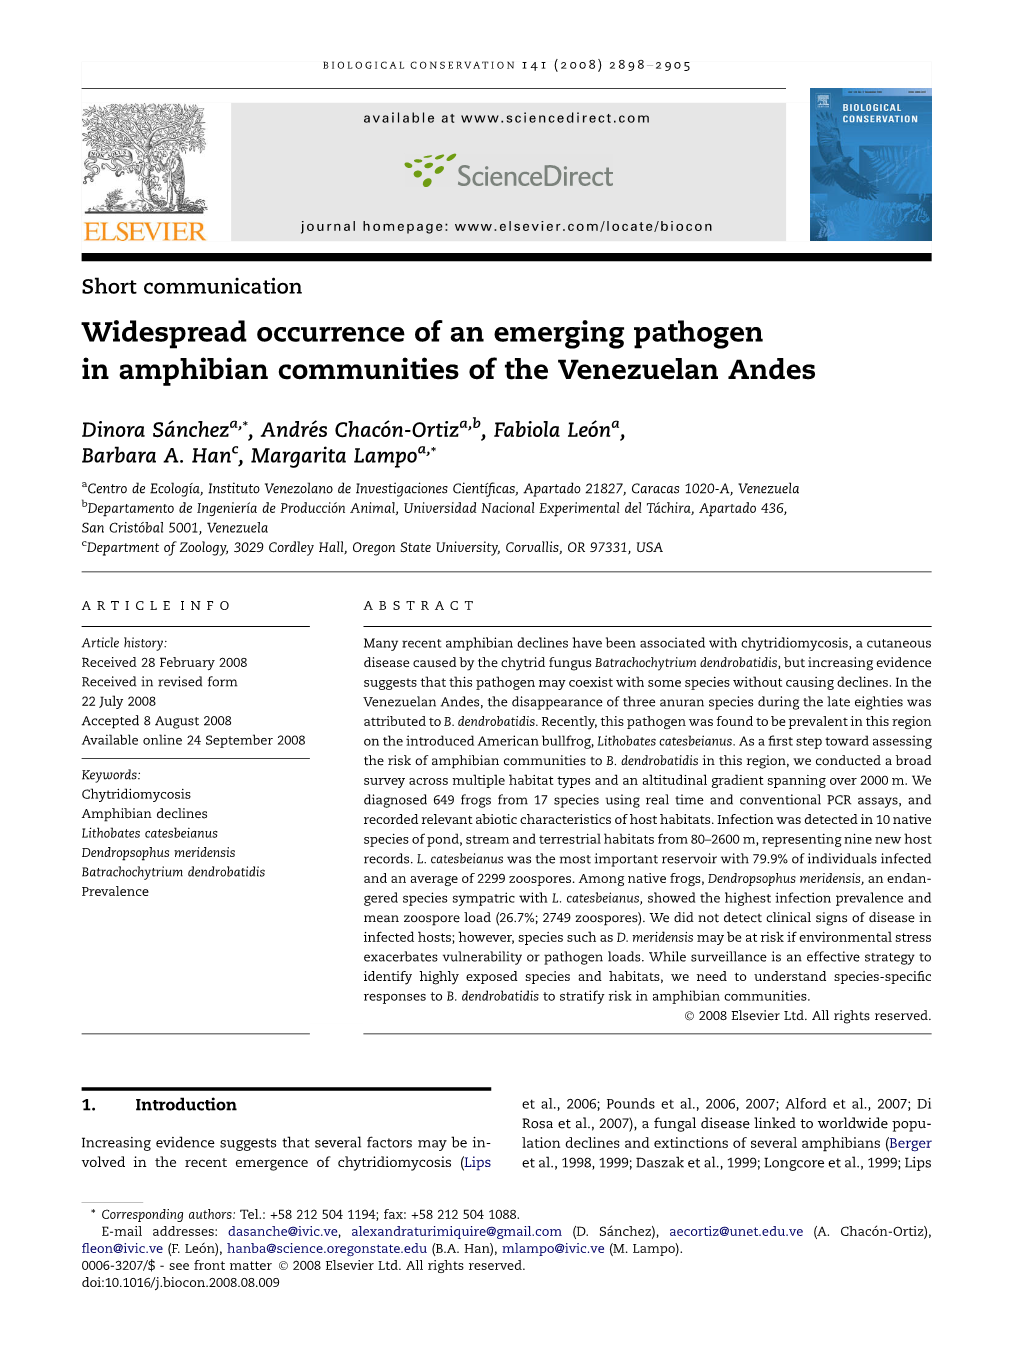 Widespread Occurrence of an Emerging Pathogen in Amphibian Communities of the Venezuelan Andes